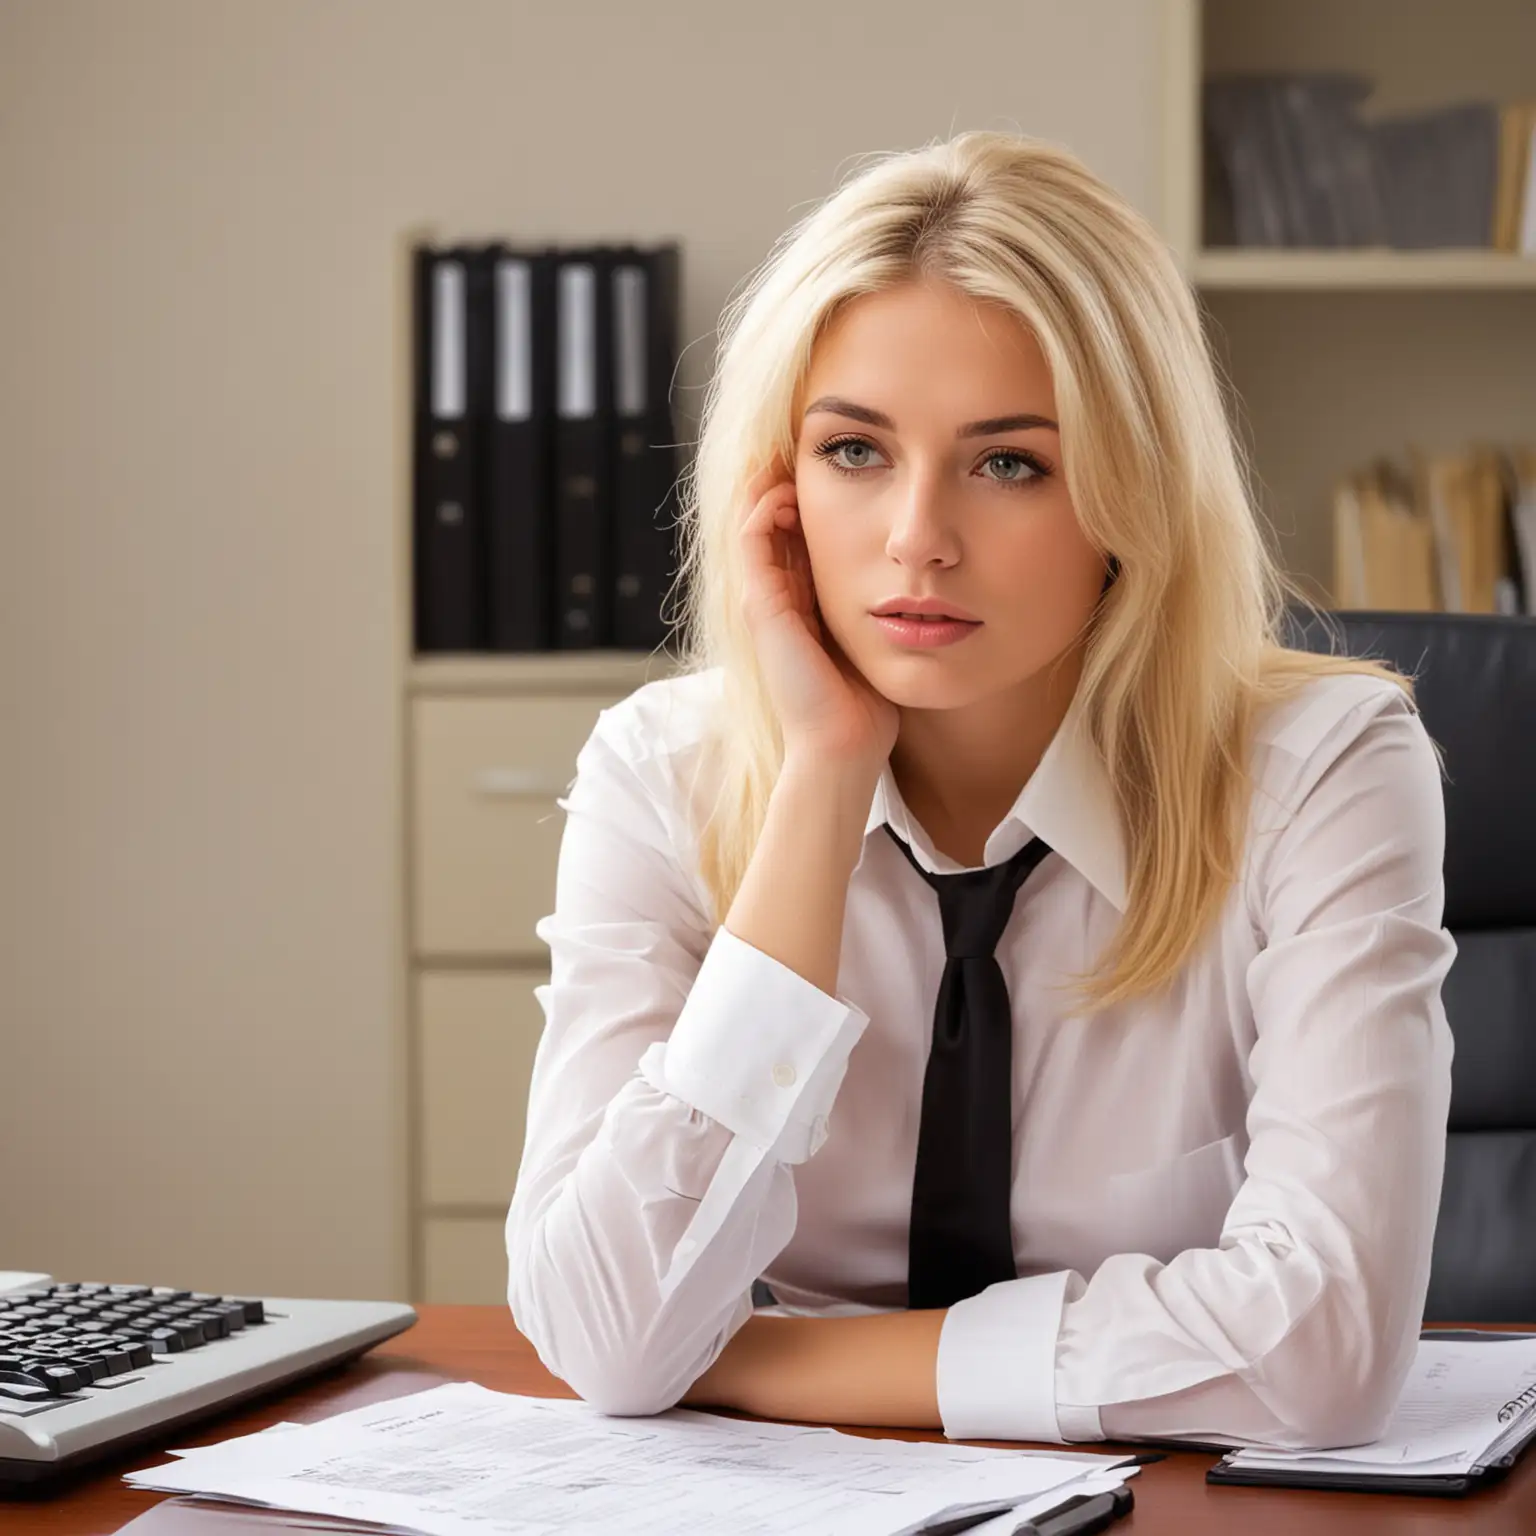 Elegant Blonde Secretary Exhausted from Days Work in Corporate Setting